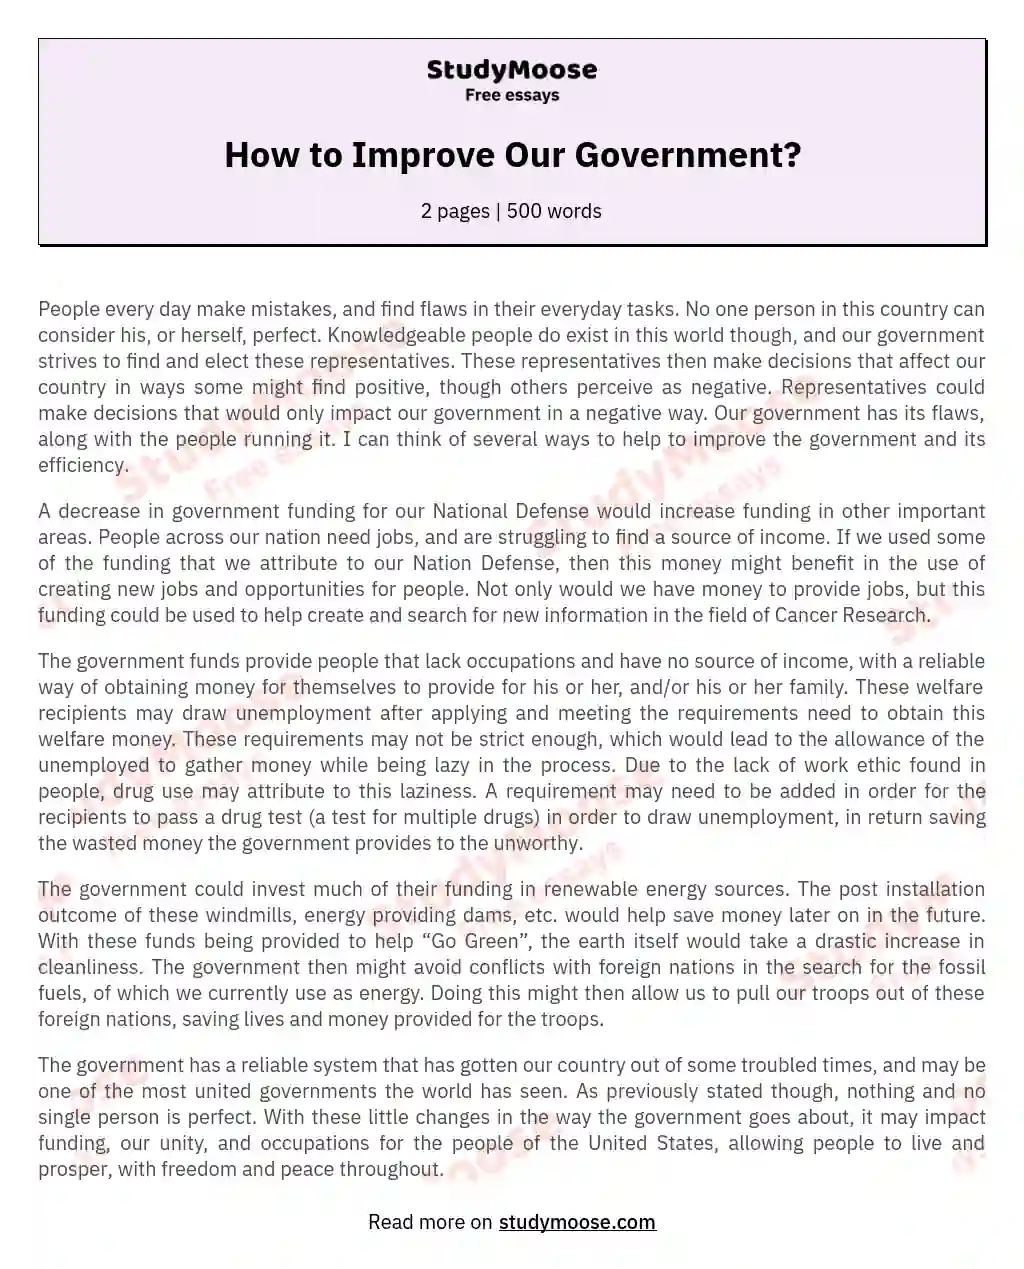 How to Improve Our Government?